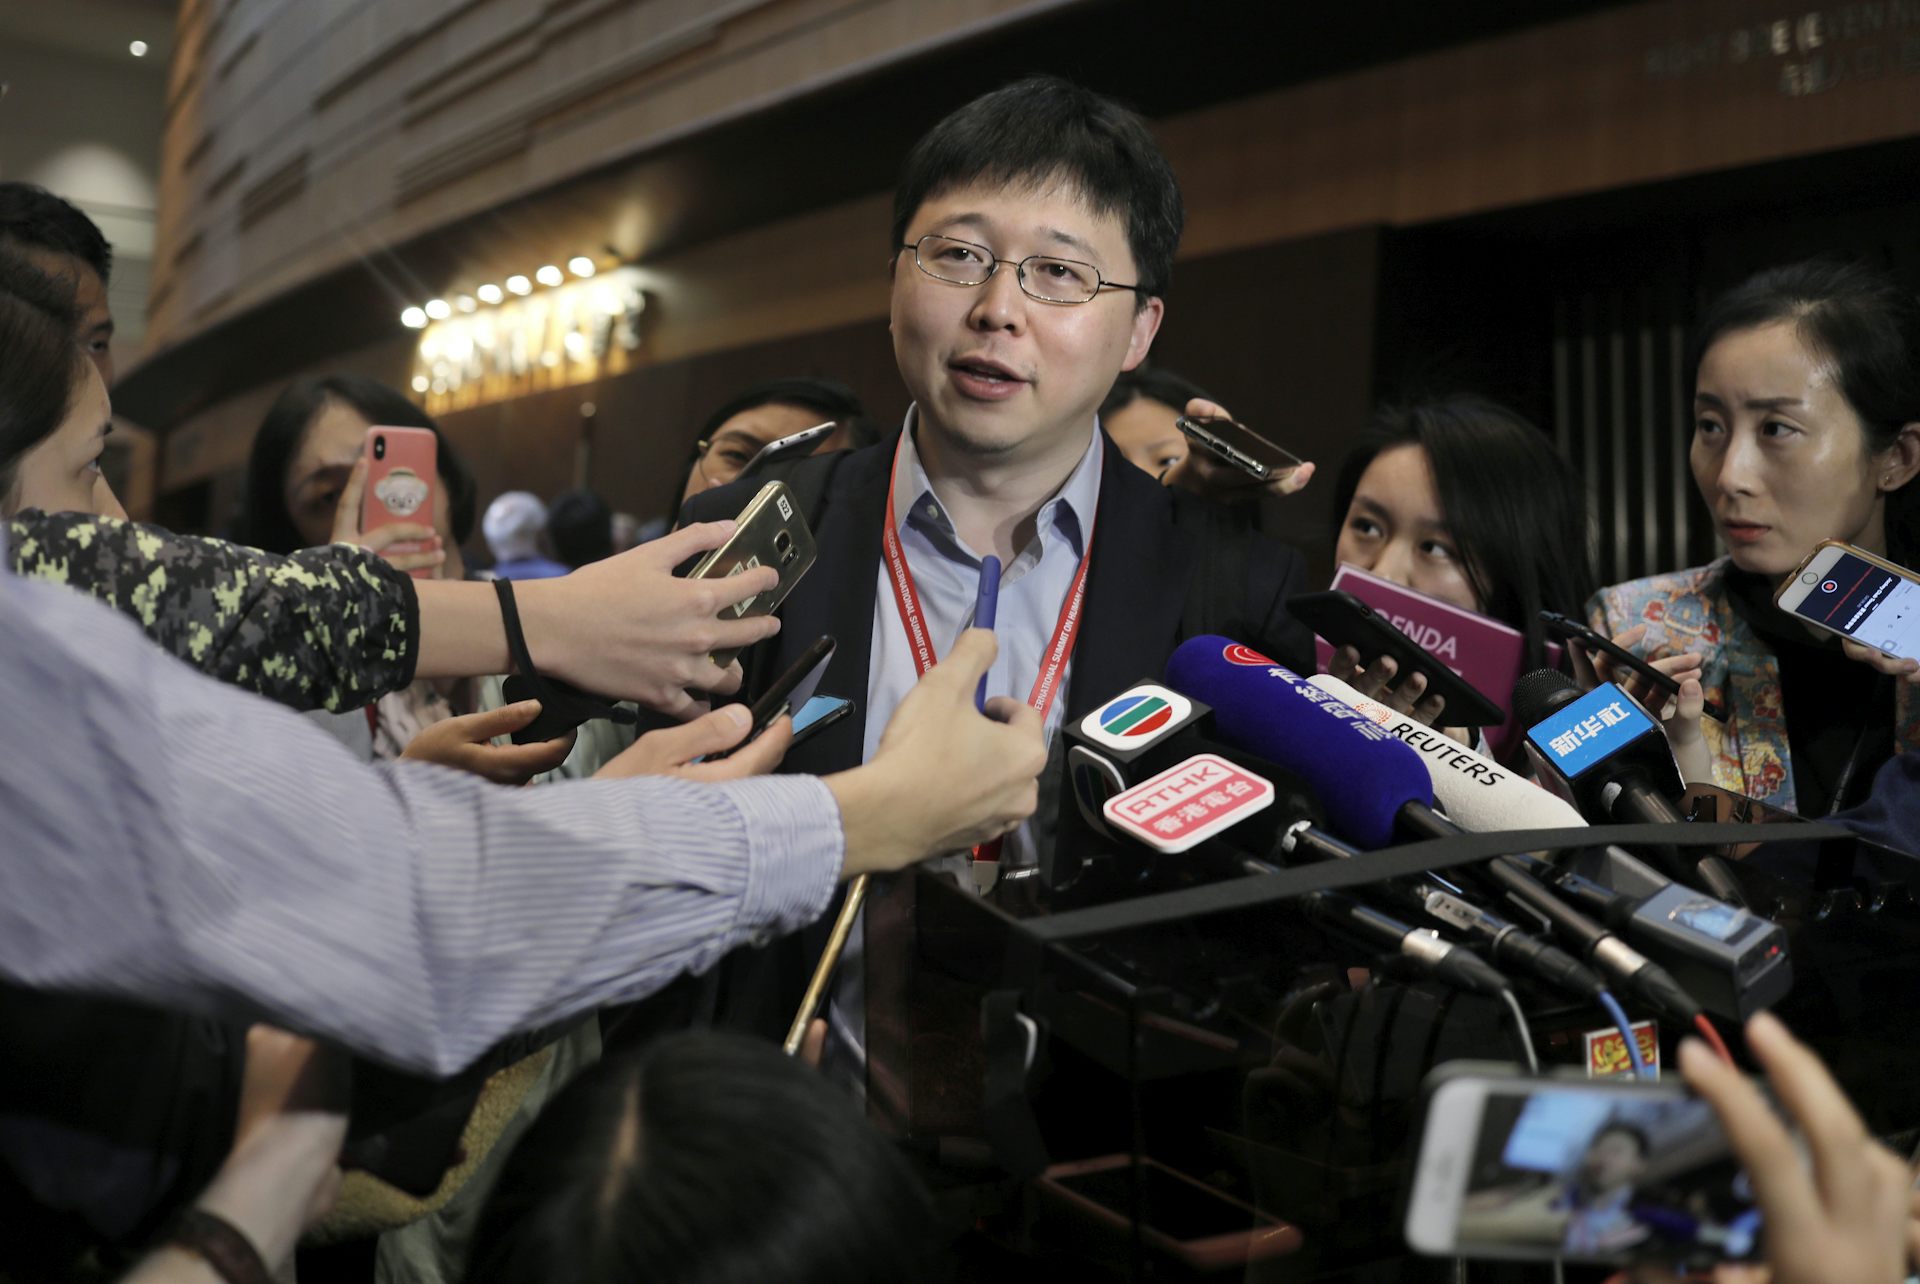 Feng Zhang, center, an institute member of Harvard and MIT’s Broad Institute, reacts to reporters on the issue of world’s first genetically edited babies after the Human Genome Editing Conference in Hong Kong on Nov. 27, 2018. (AP Photo/Vincent Yu)